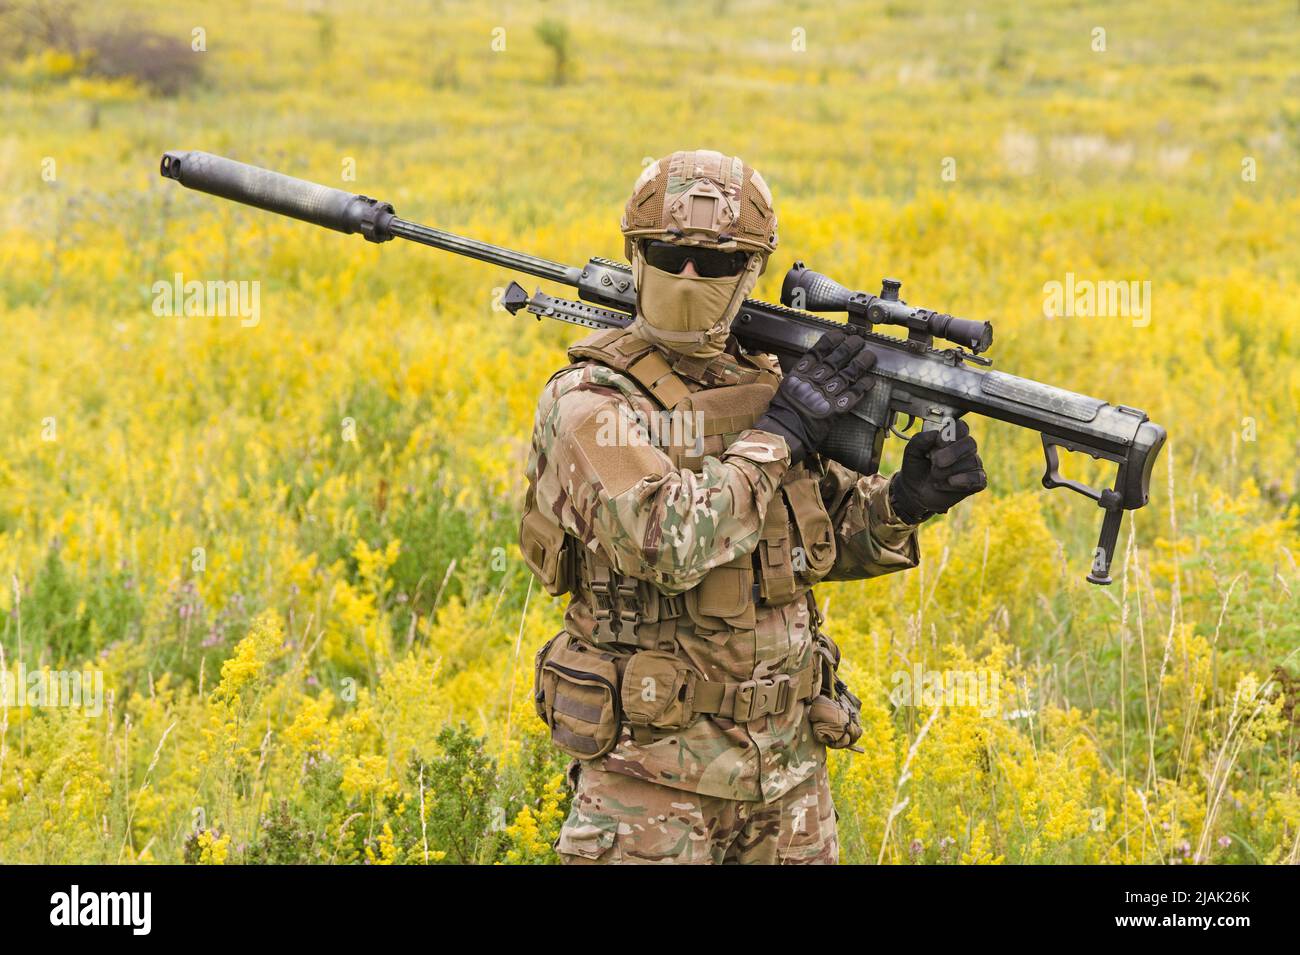 Soldier with big sniper rifle walking across blooming field. Stock Photo